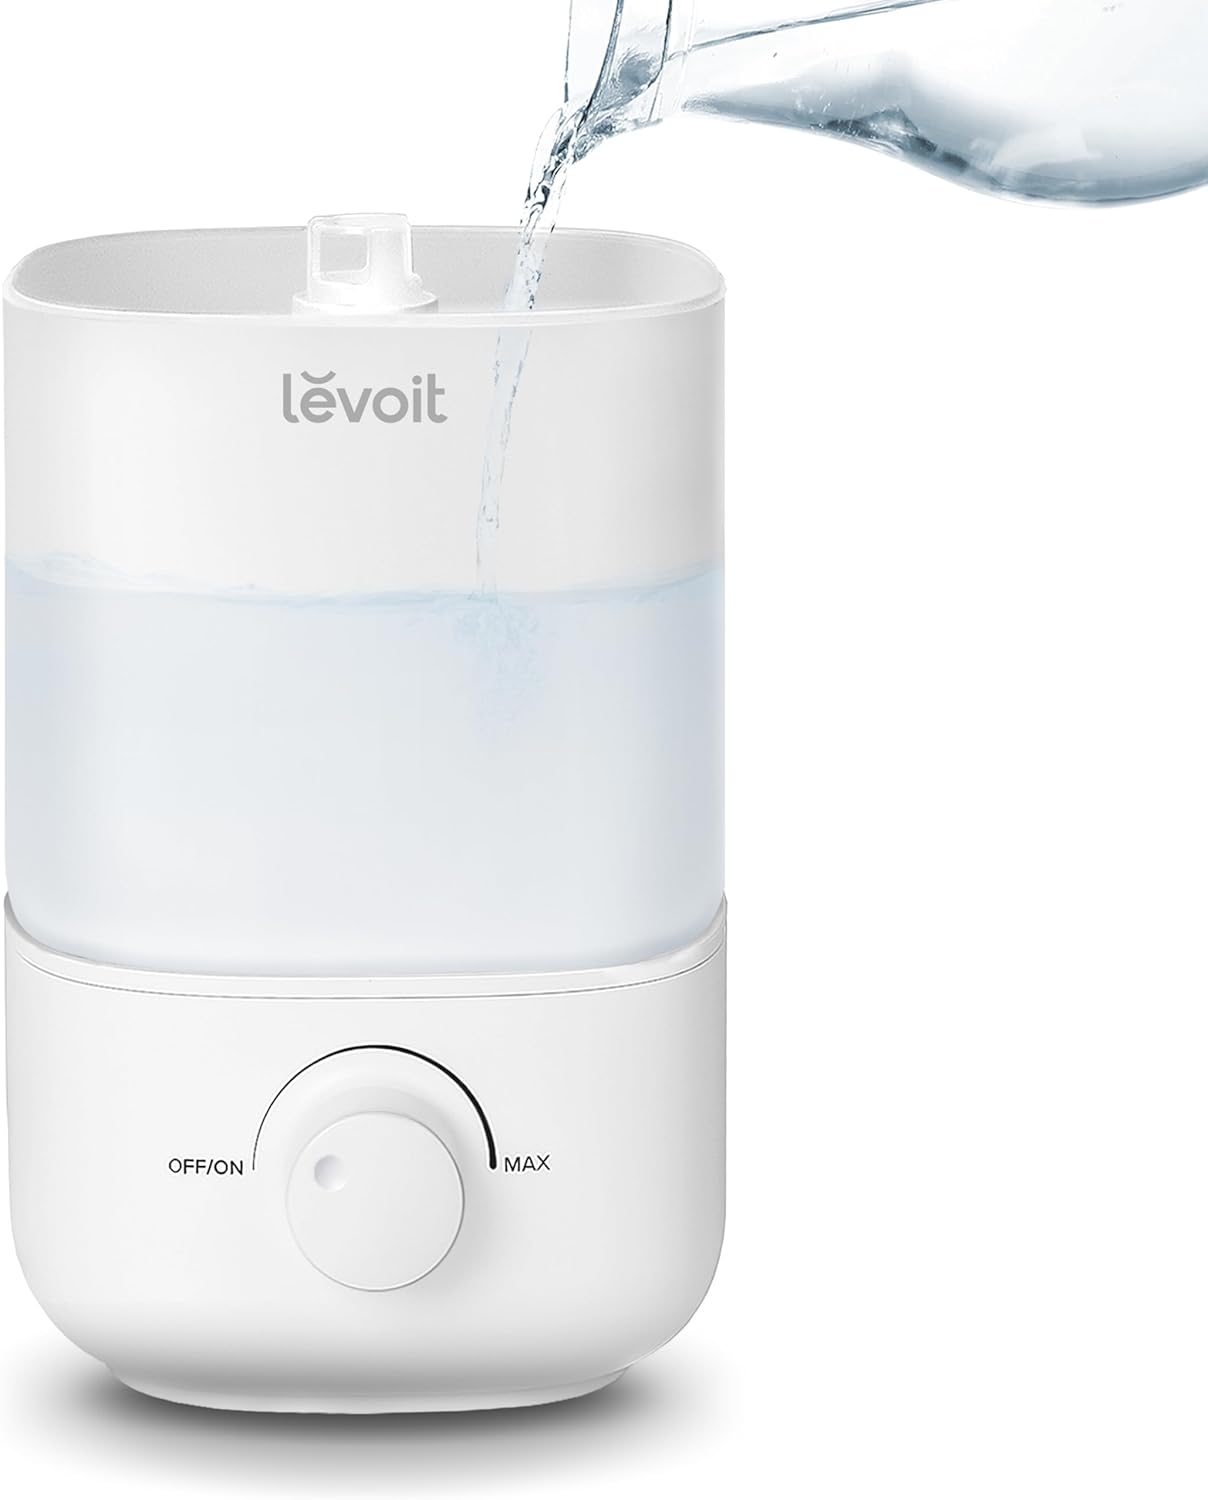 LEVOIT Top Fill Humidifiers for Bedroom, 2.5L Large Tank, Easy to Fill and Clean, 26dB Quiet Cool Mist Air Humidifier for Home Baby Nursery  Plants,Auto Shut-off and BPA-Free for Safety, 25H Runtime